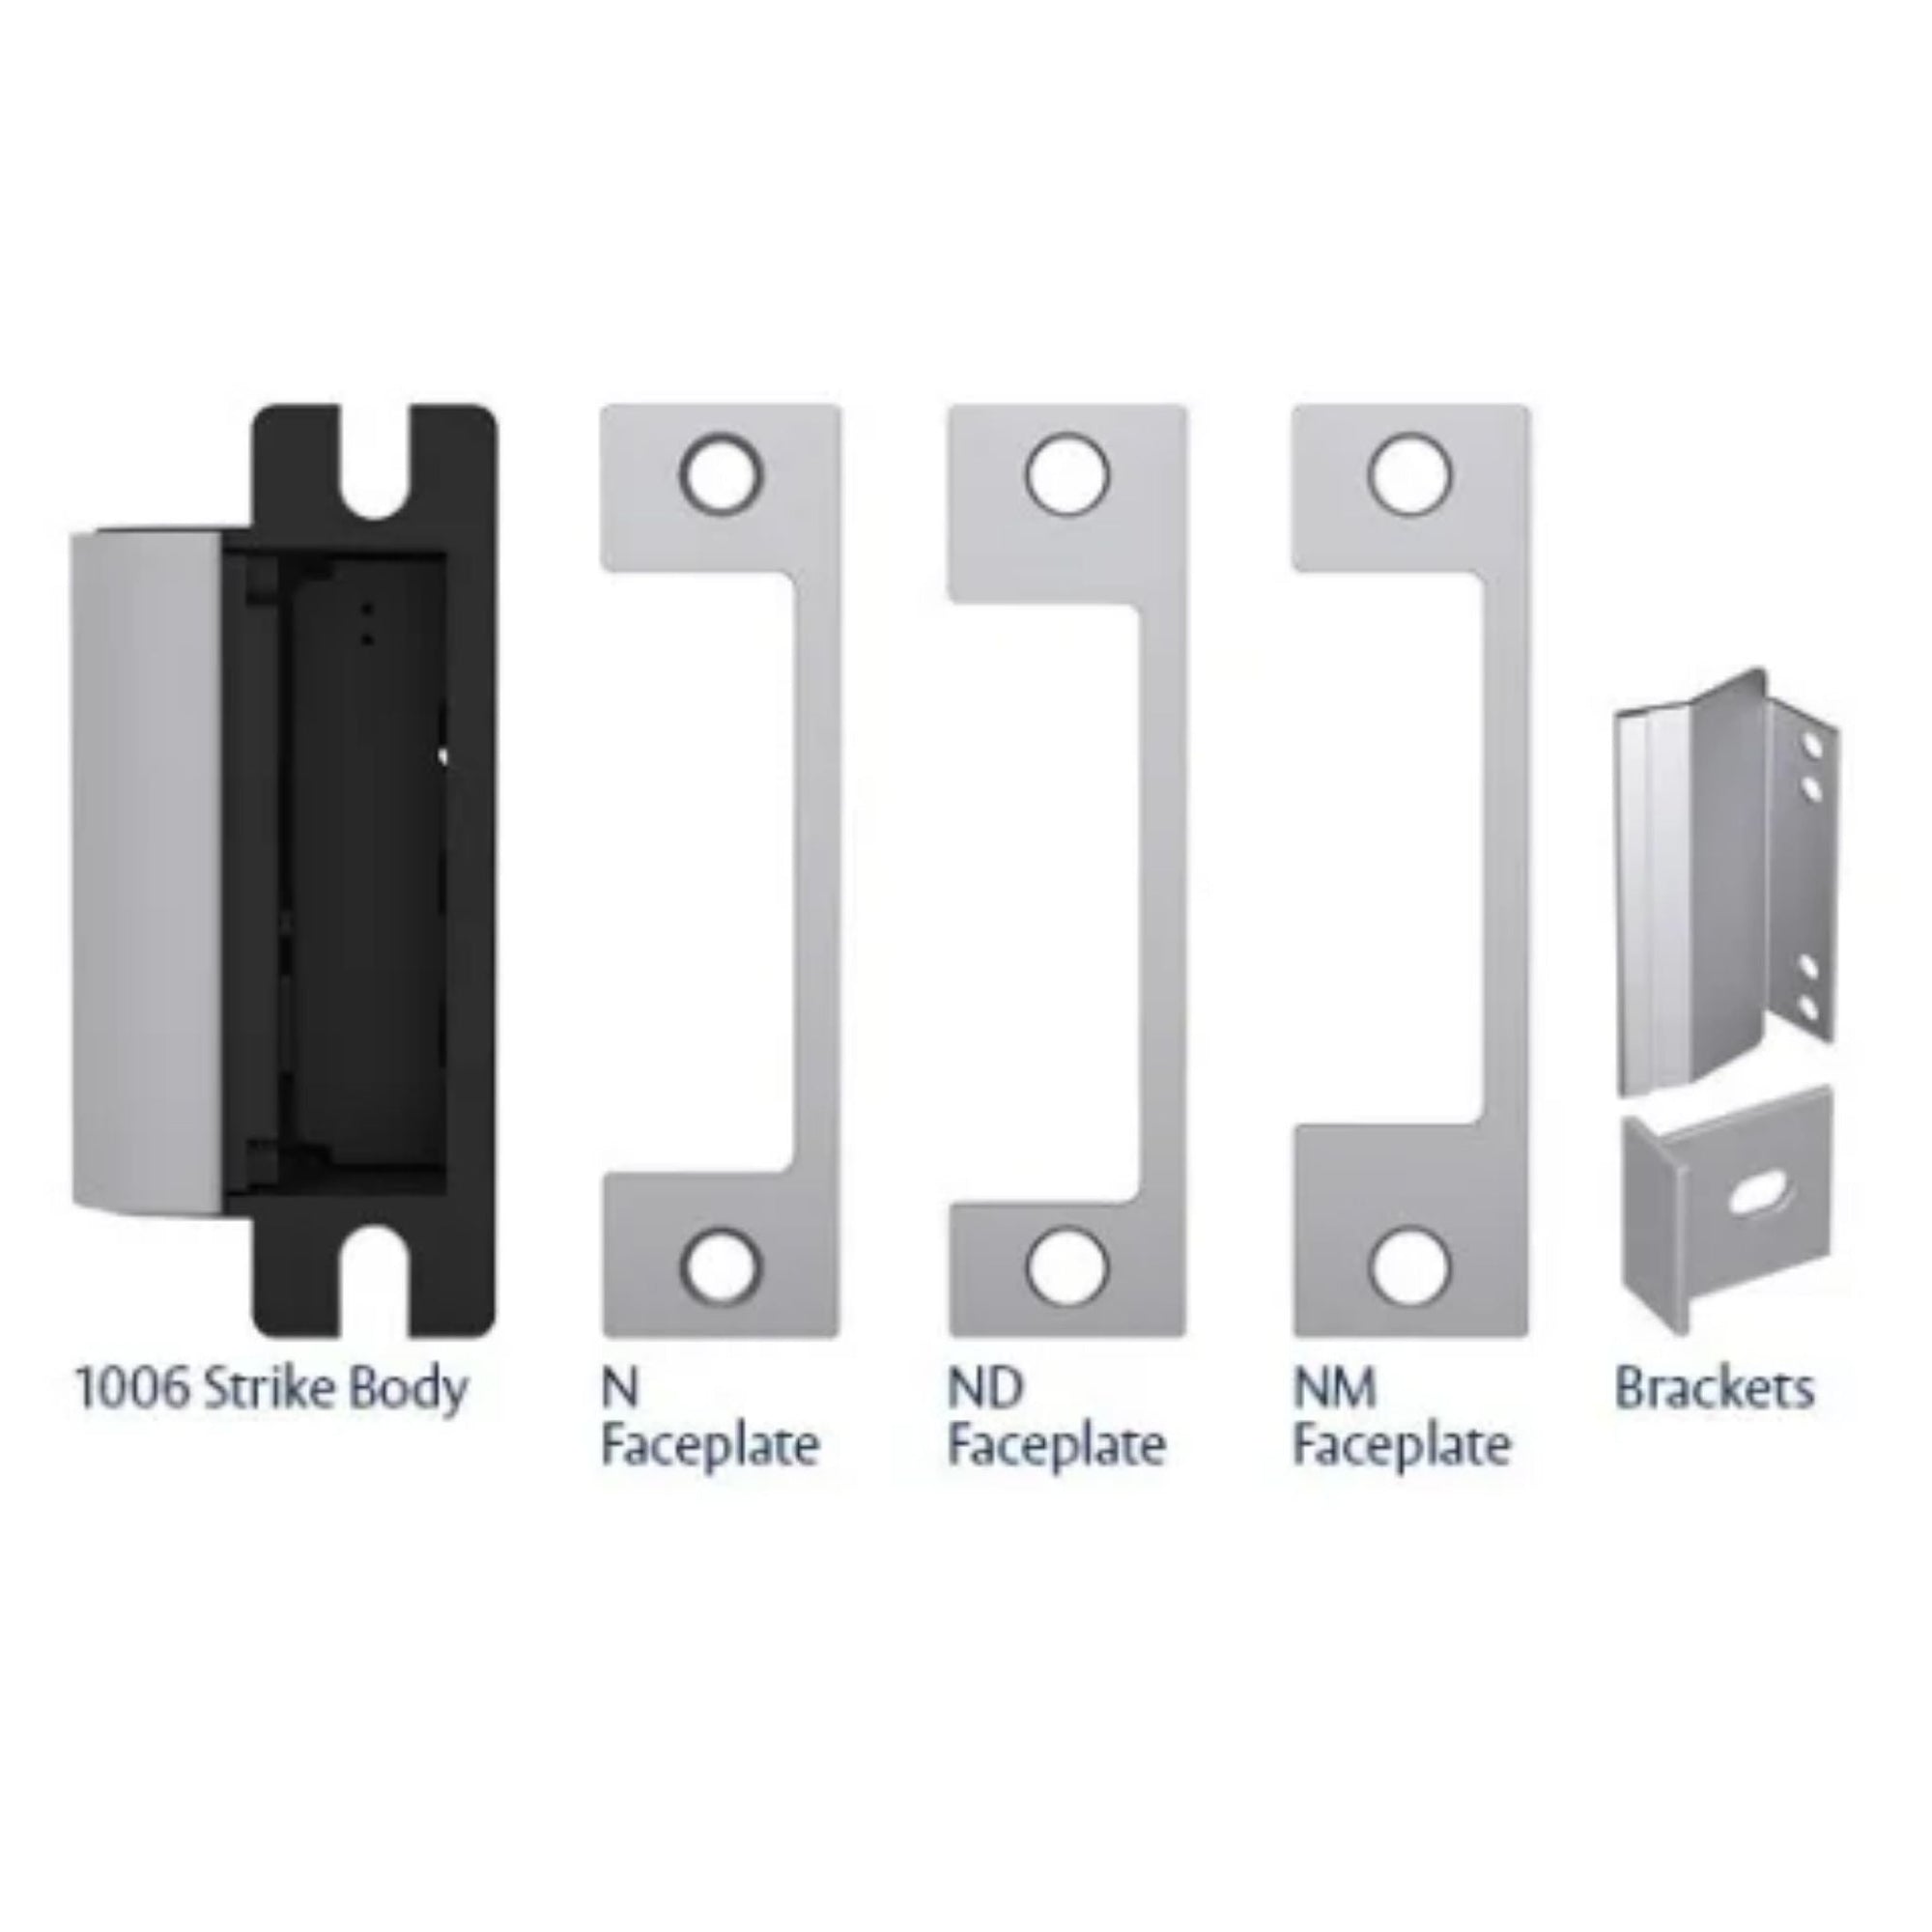 HES 1006CAS 630 Complete Pac Electric Strike Includes 1006 Strike Body, 3 Faceplates (N, ND-Option & NM-Option) and All Mounting Hardware Satin Stainless Steel Electric Strikes Fail Secure or Fail Safe Strikes - The Lock Source